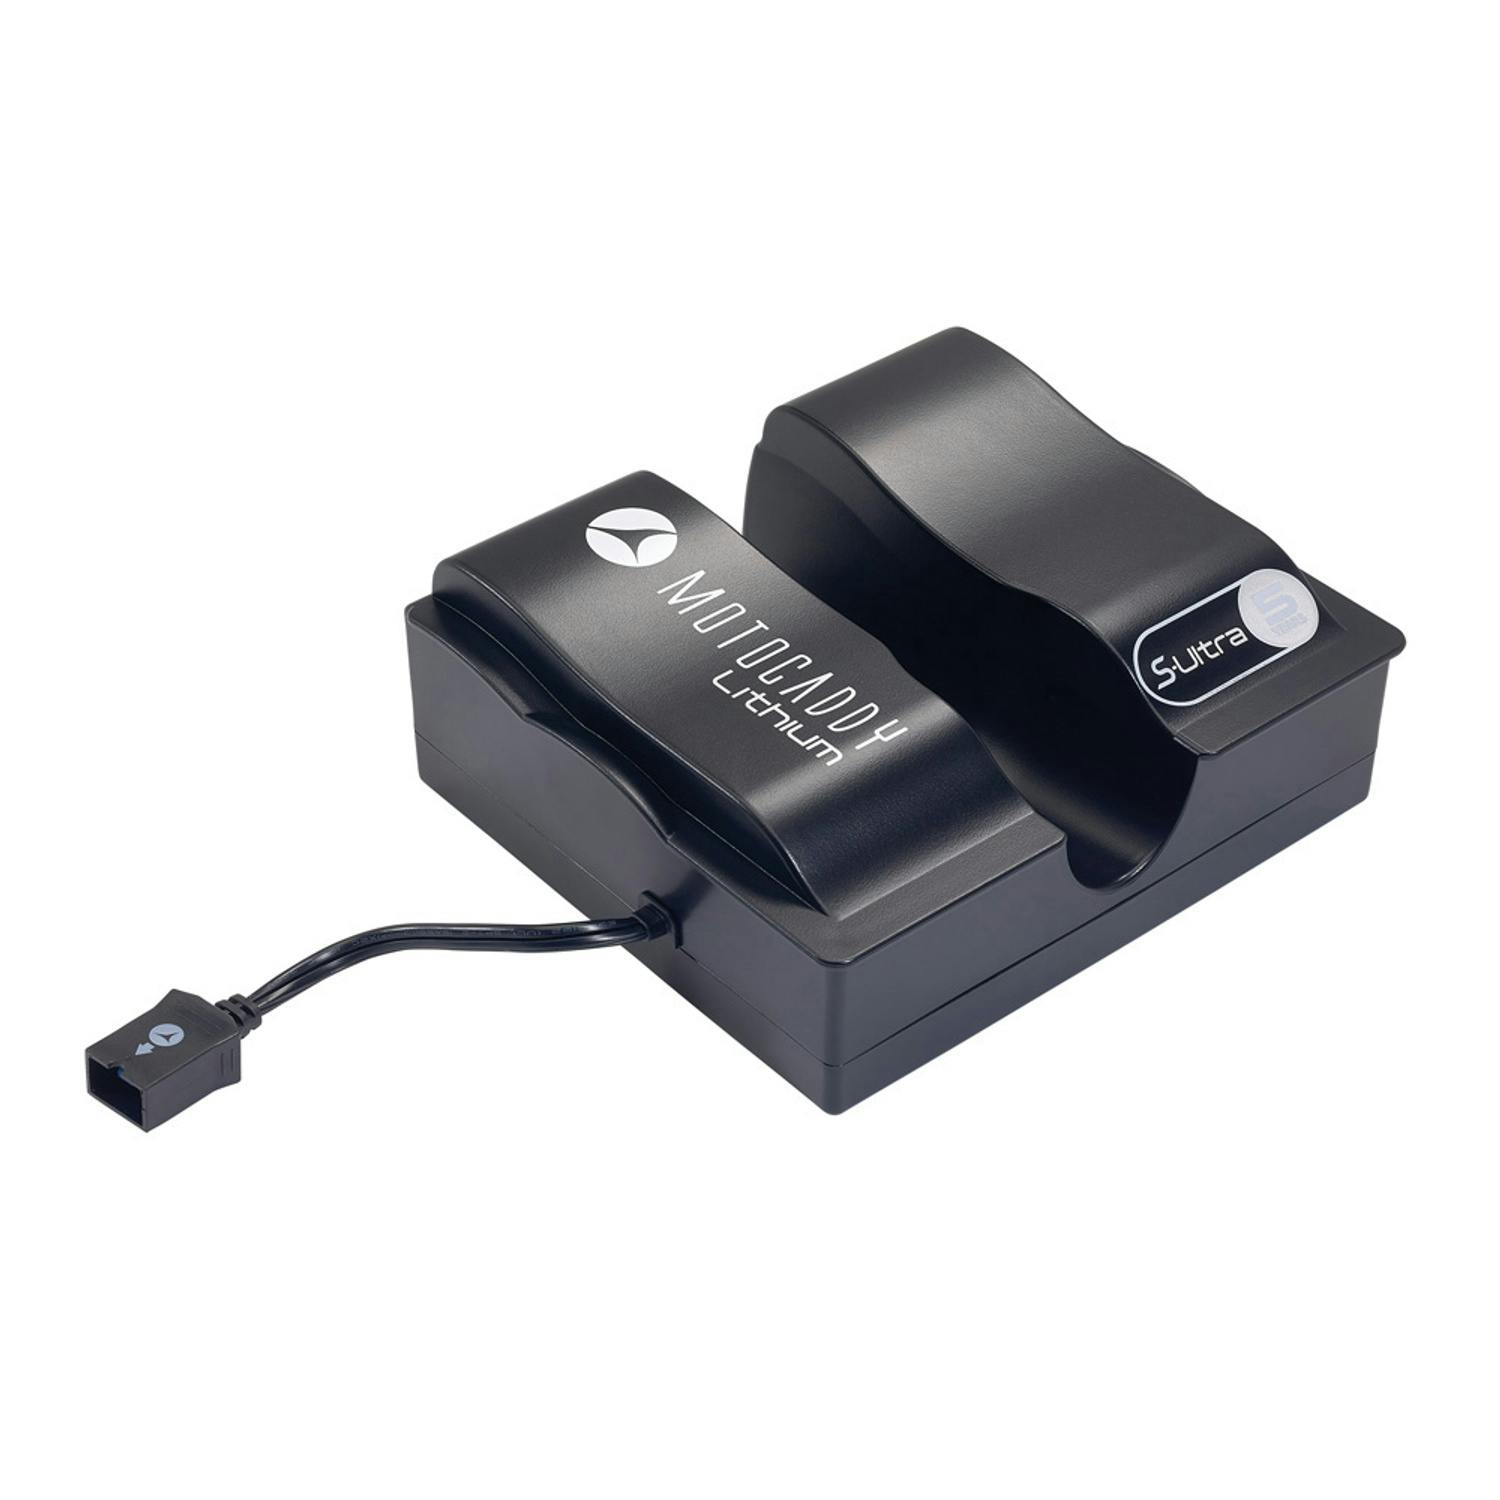 MC S-series 20amp Ultra Lithium Battery & Charger